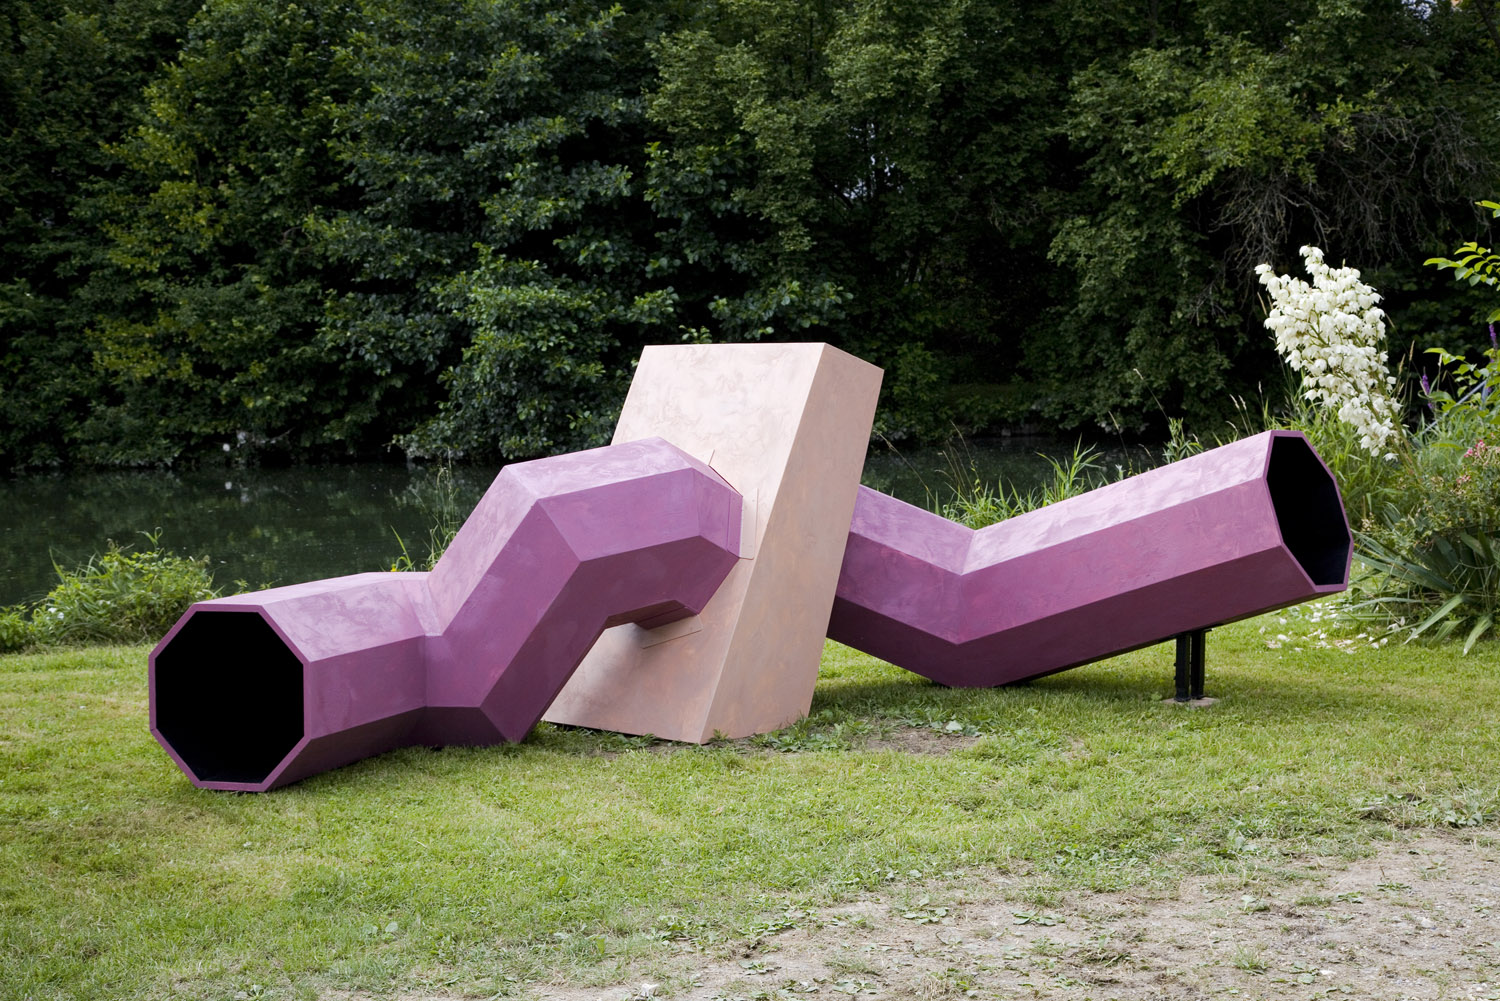 A winding pink and beige painted wormhole performance sculpture made of wood lies on a lawn next to a pond